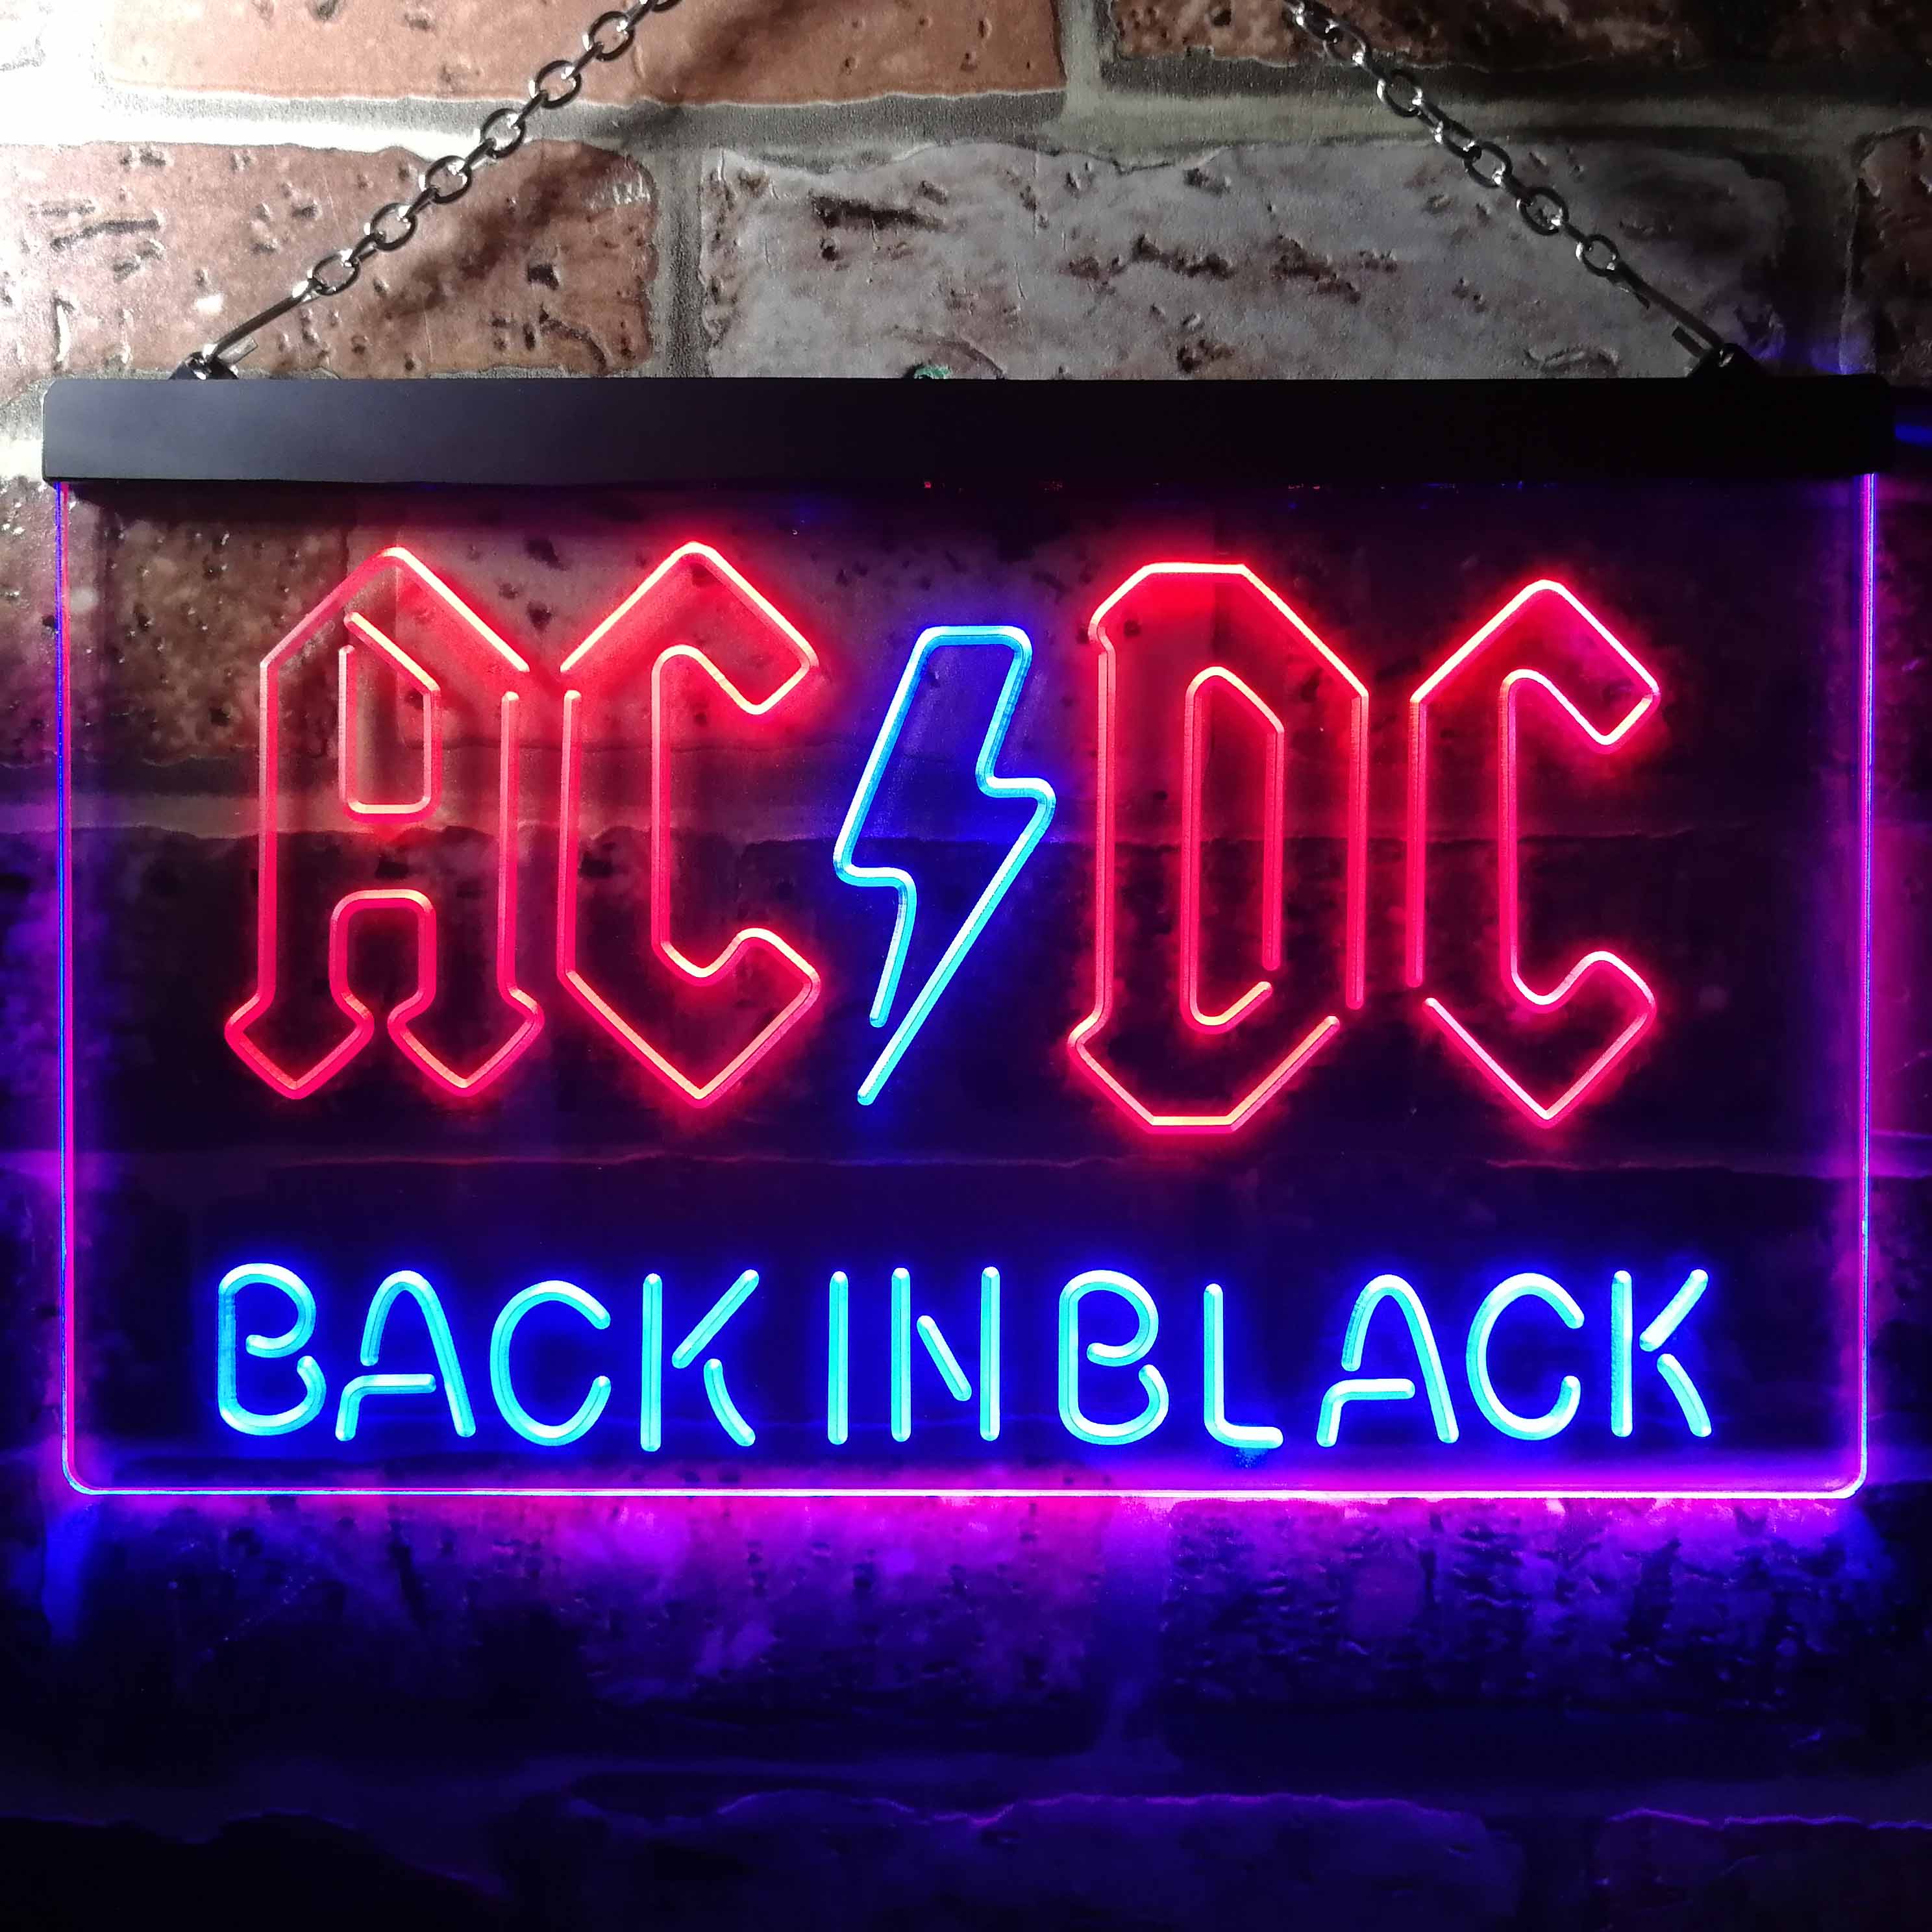 ACDC Back In Black Music Band Led Neon Light Up Sign